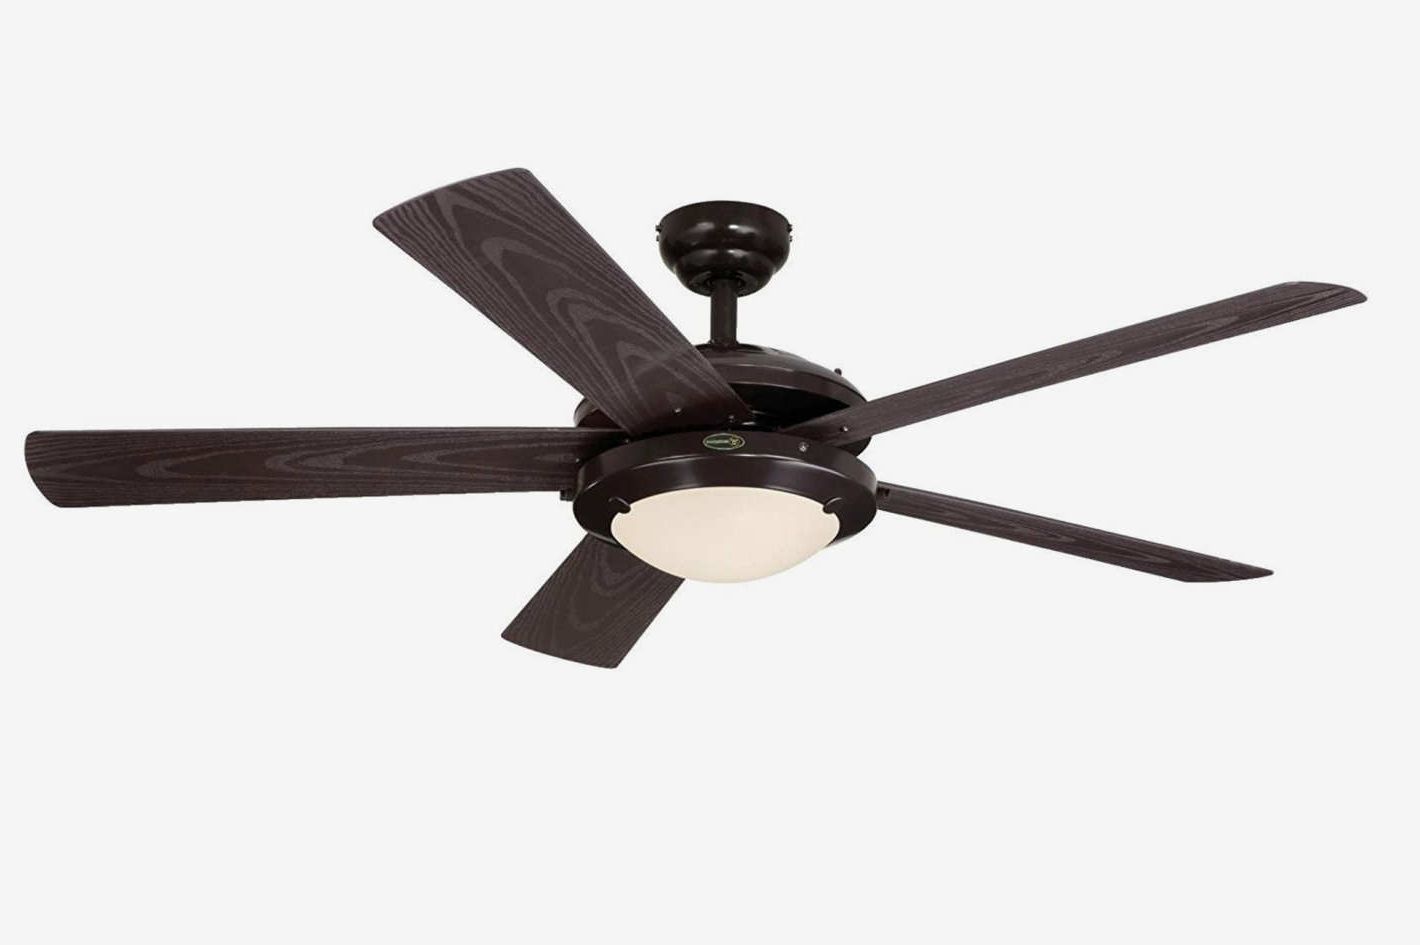 Outdoor Ceiling Fans At Amazon In Newest The 6 Best Ceiling Fans (View 4 of 21)